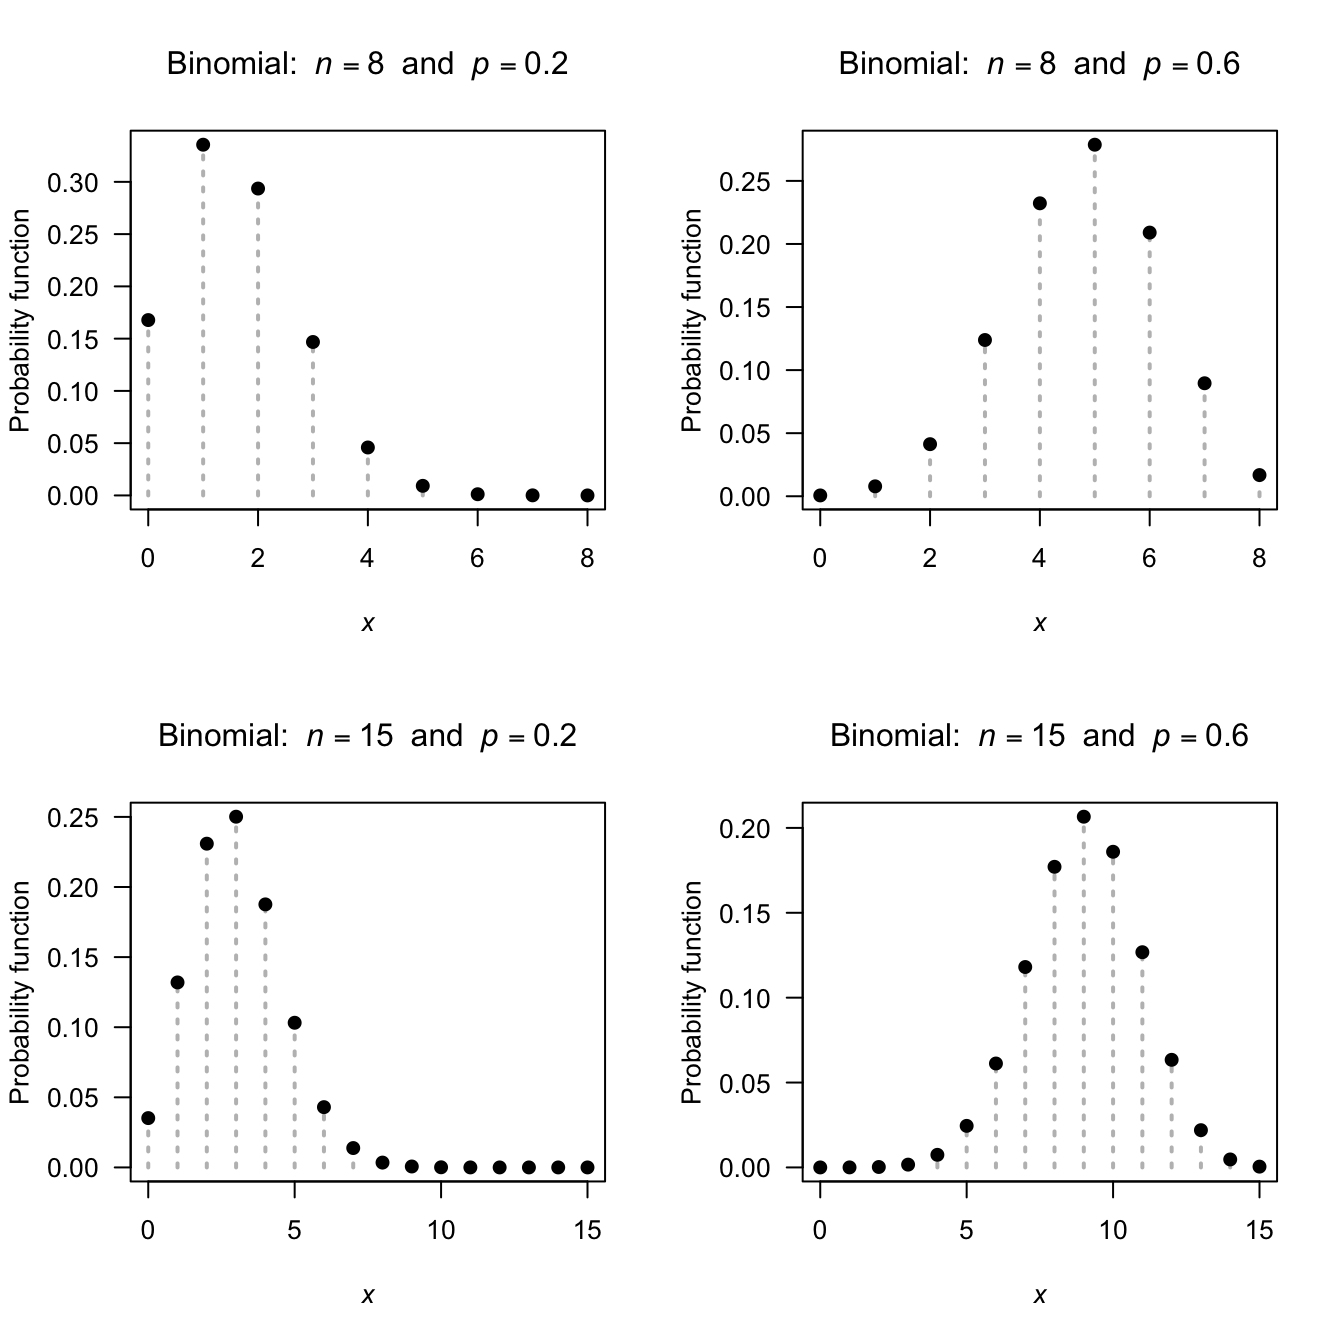 The pf for the binomial distribution for various values of $p$ and $n$